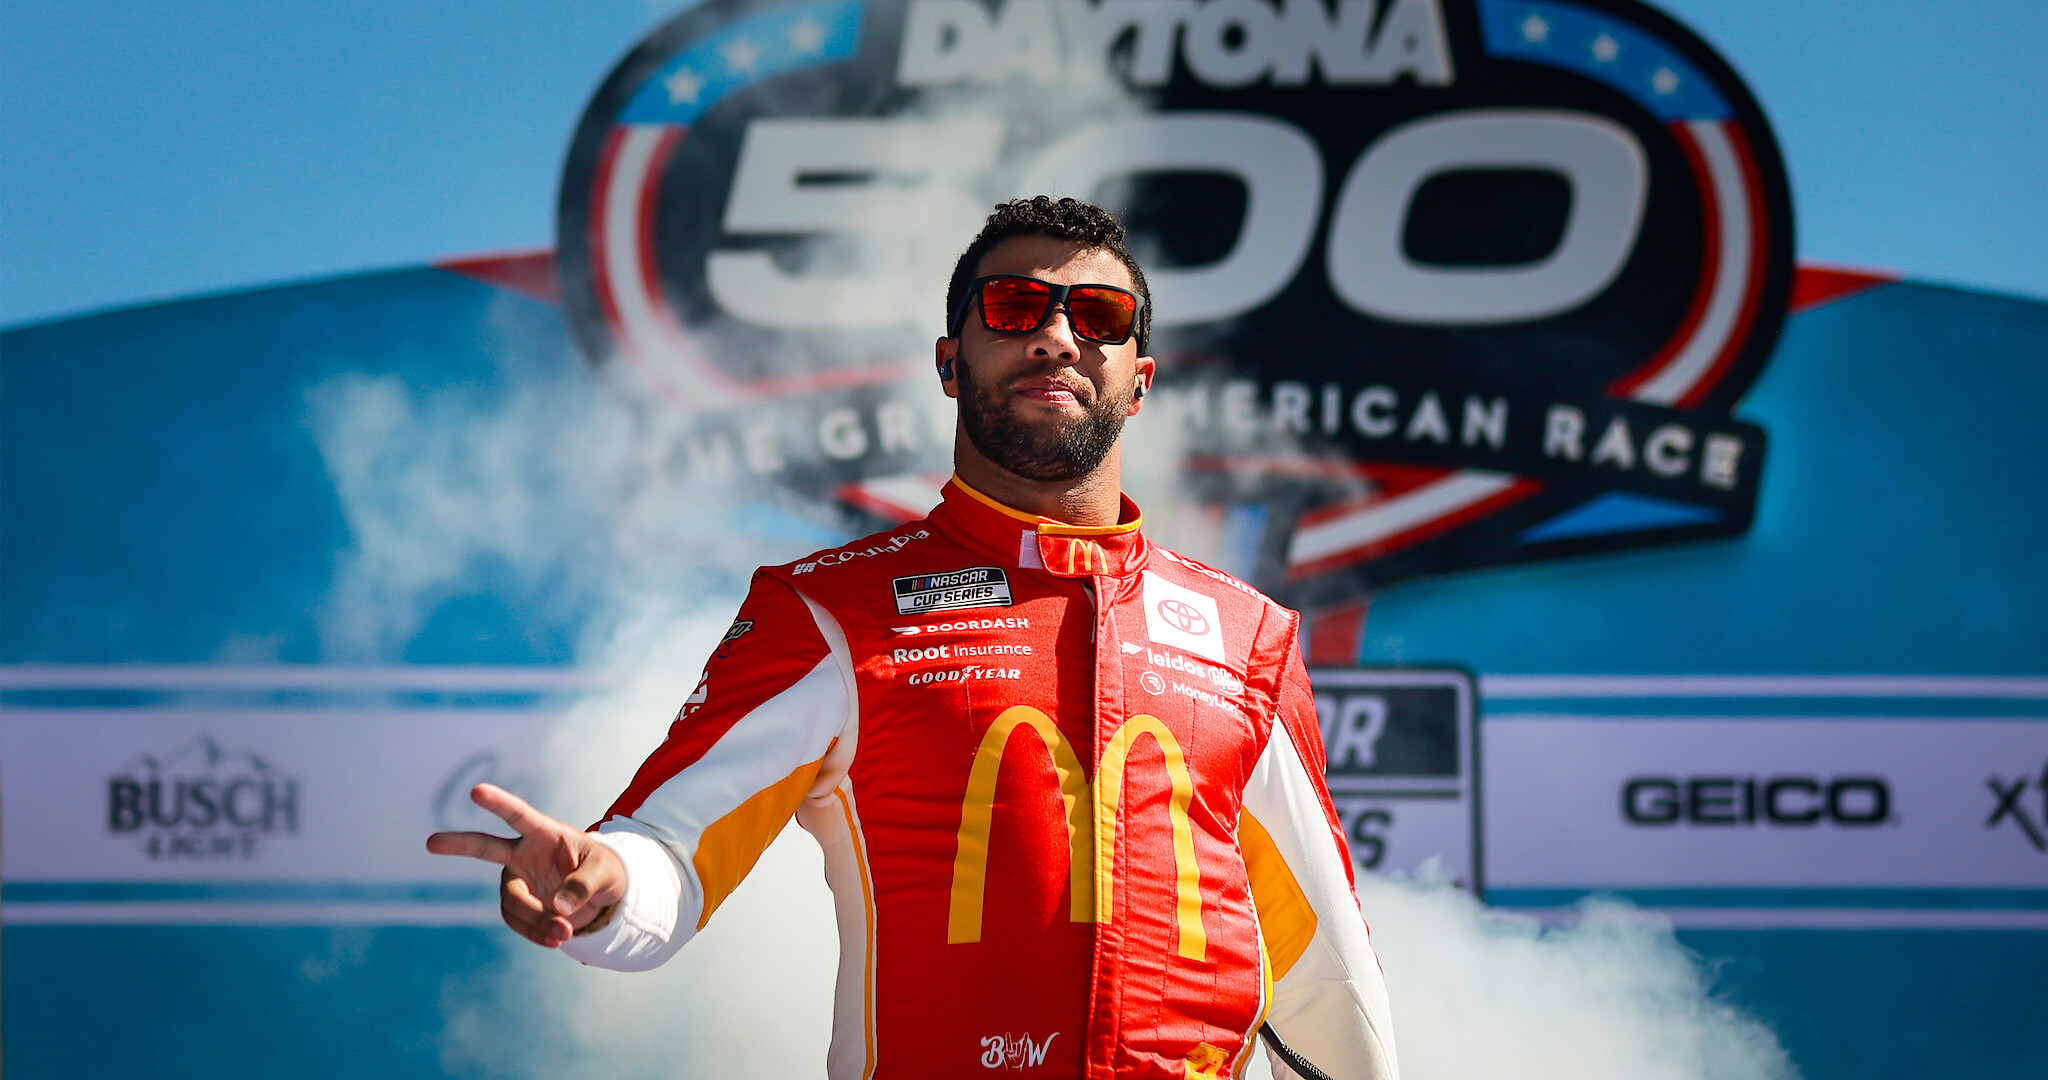 Liked Race Bubba Wallace? Heres How to Get into NASCAR